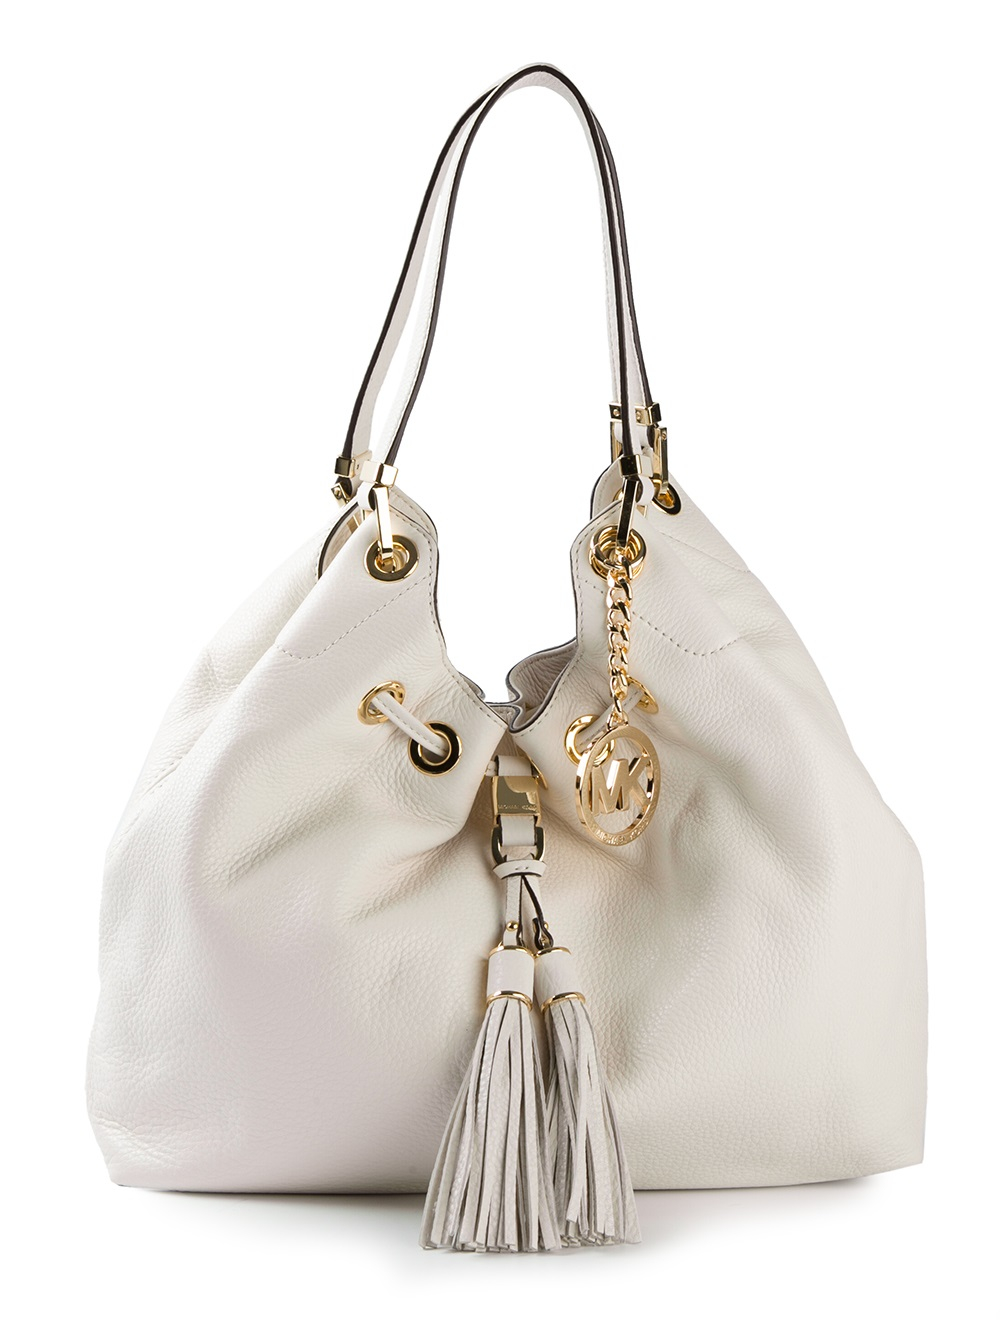 Lyst - MICHAEL Michael Kors Large Camden Shoulder Tote in White